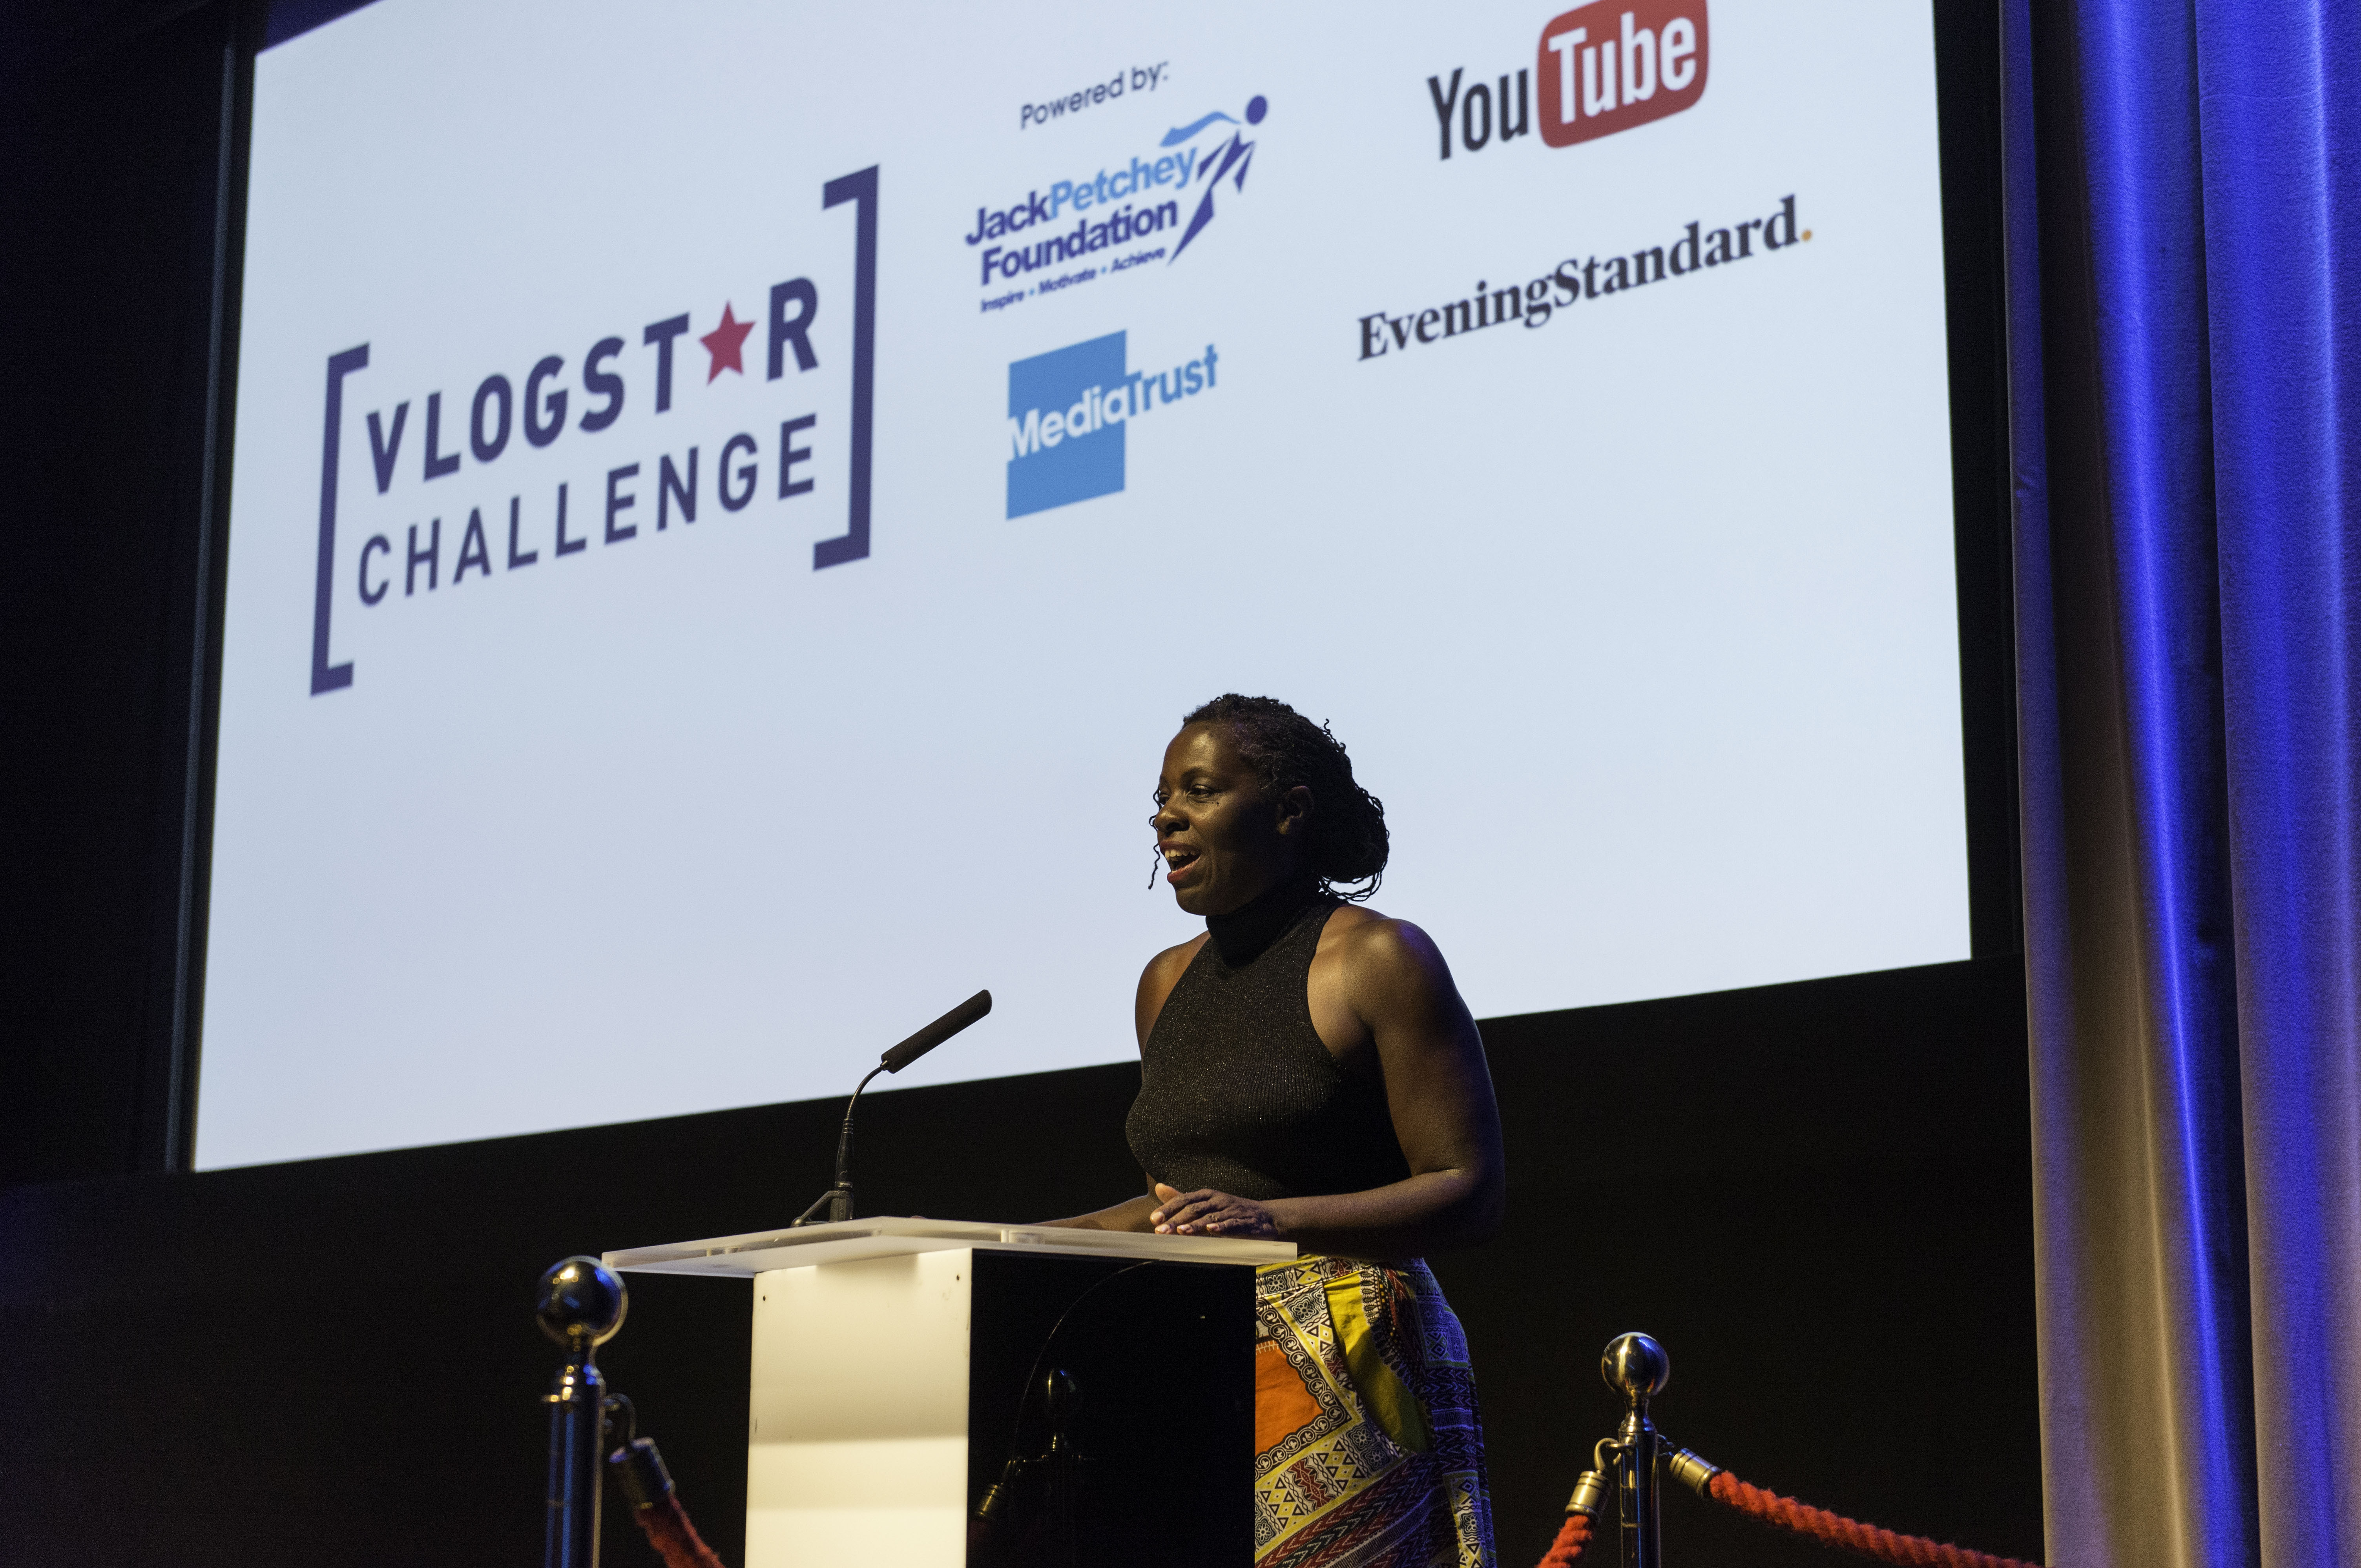 Naomi Seesay presenting at the 2017 Vlogstar Challenge final